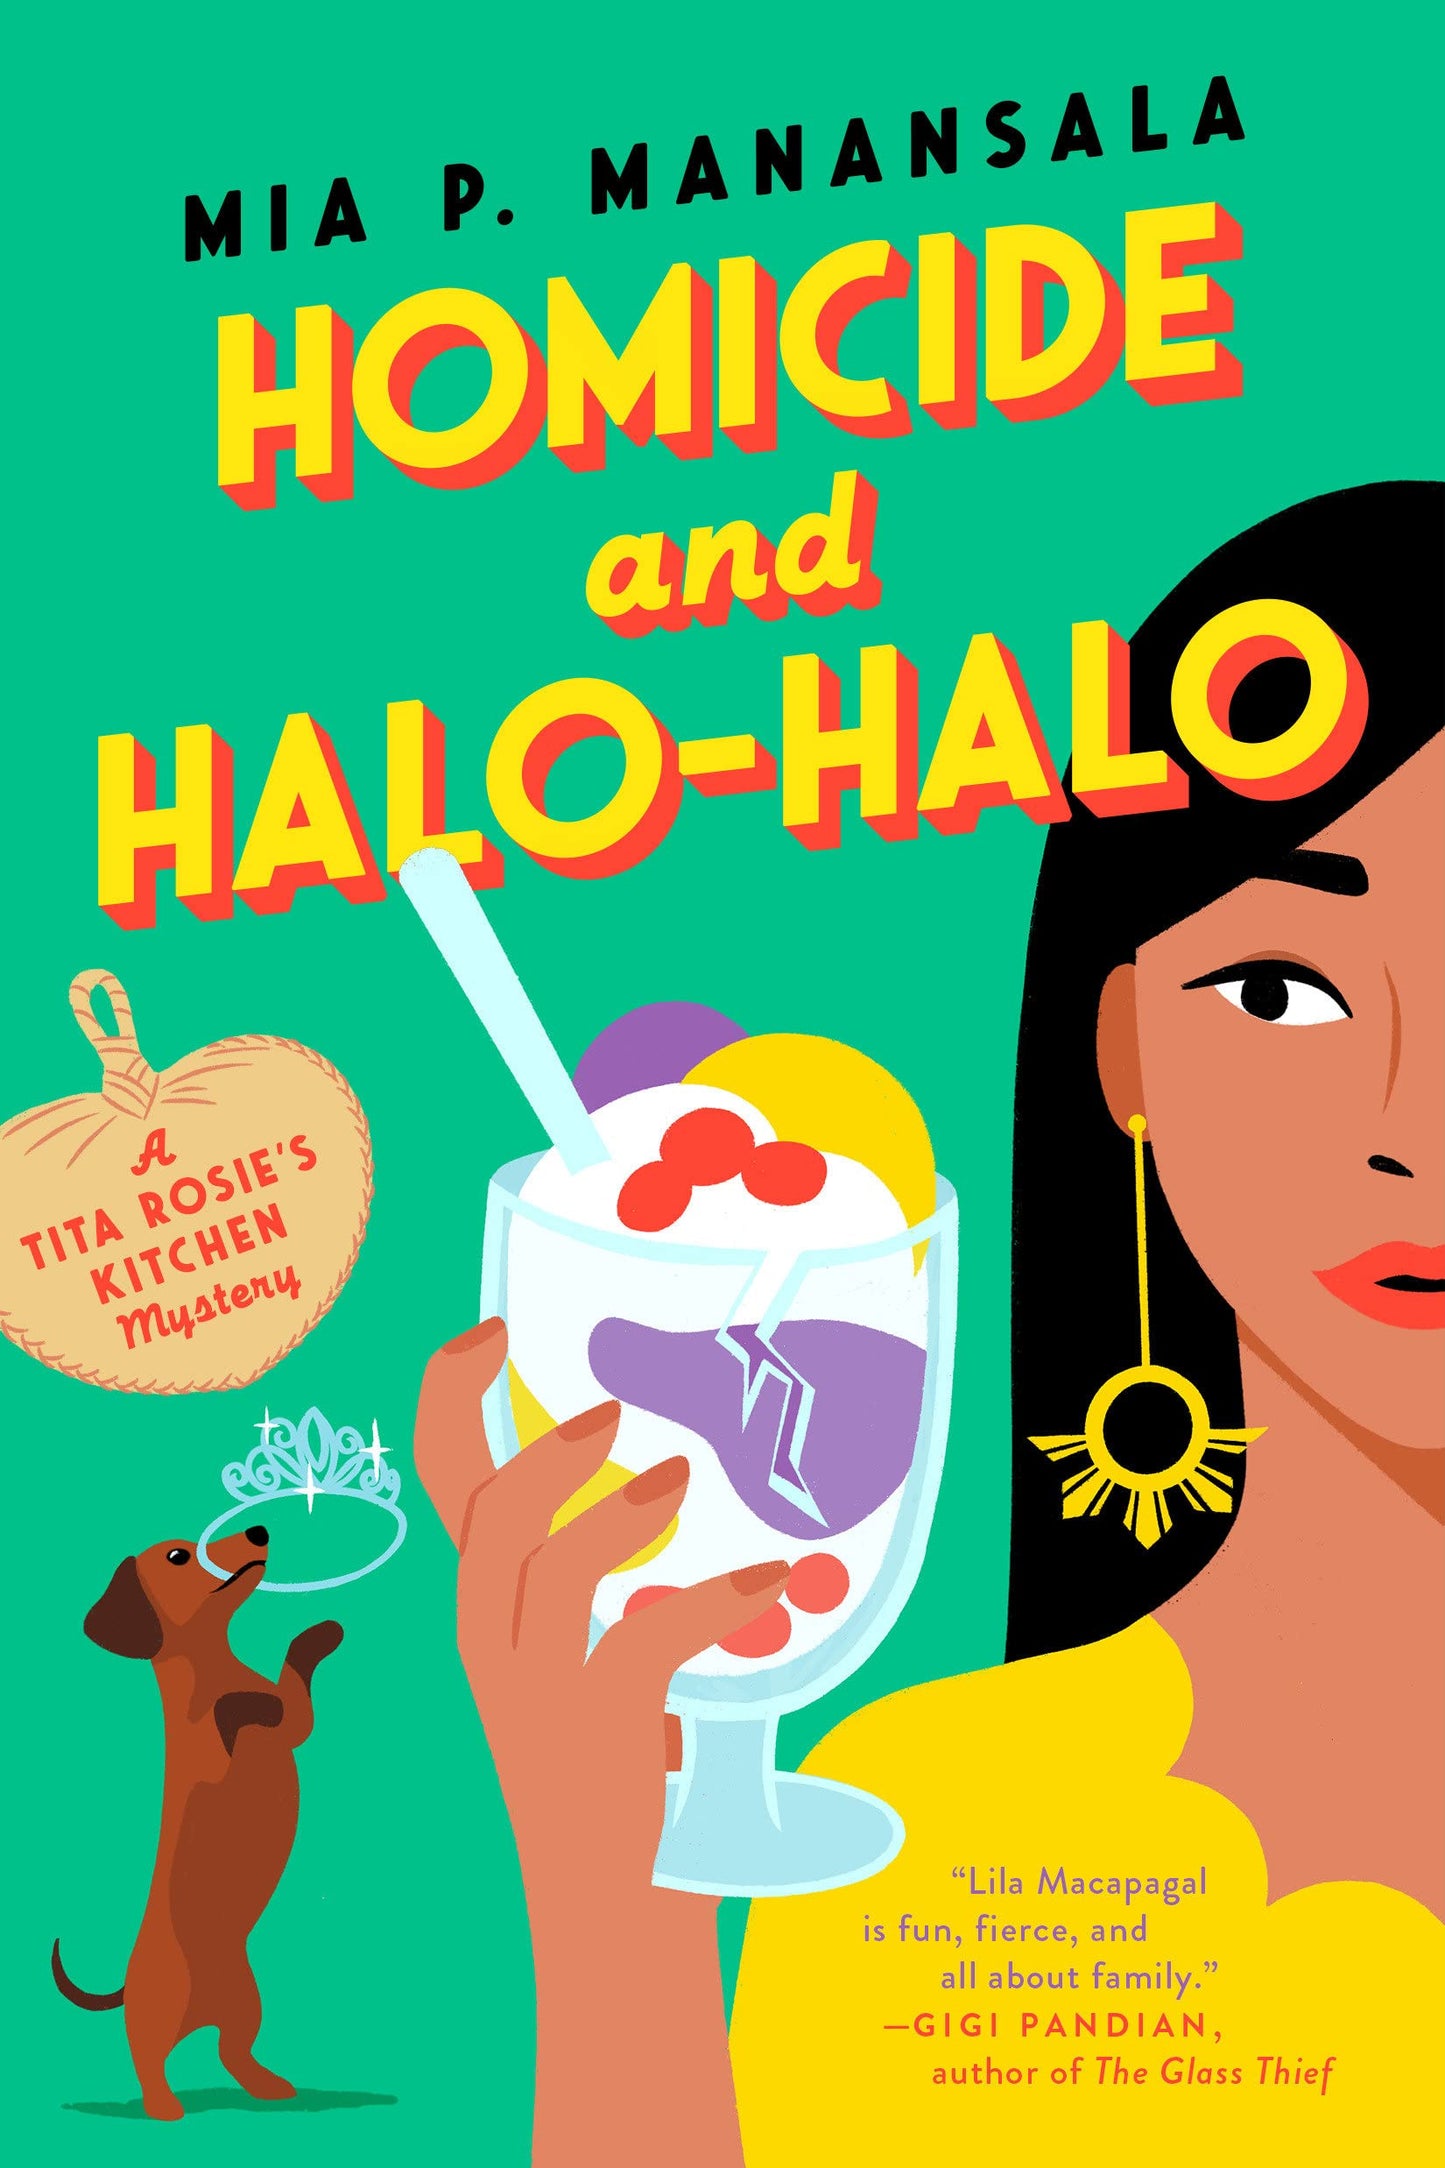 Homicide and Halo-Halo // A Tita Rosie's Kitchen Mystery #2